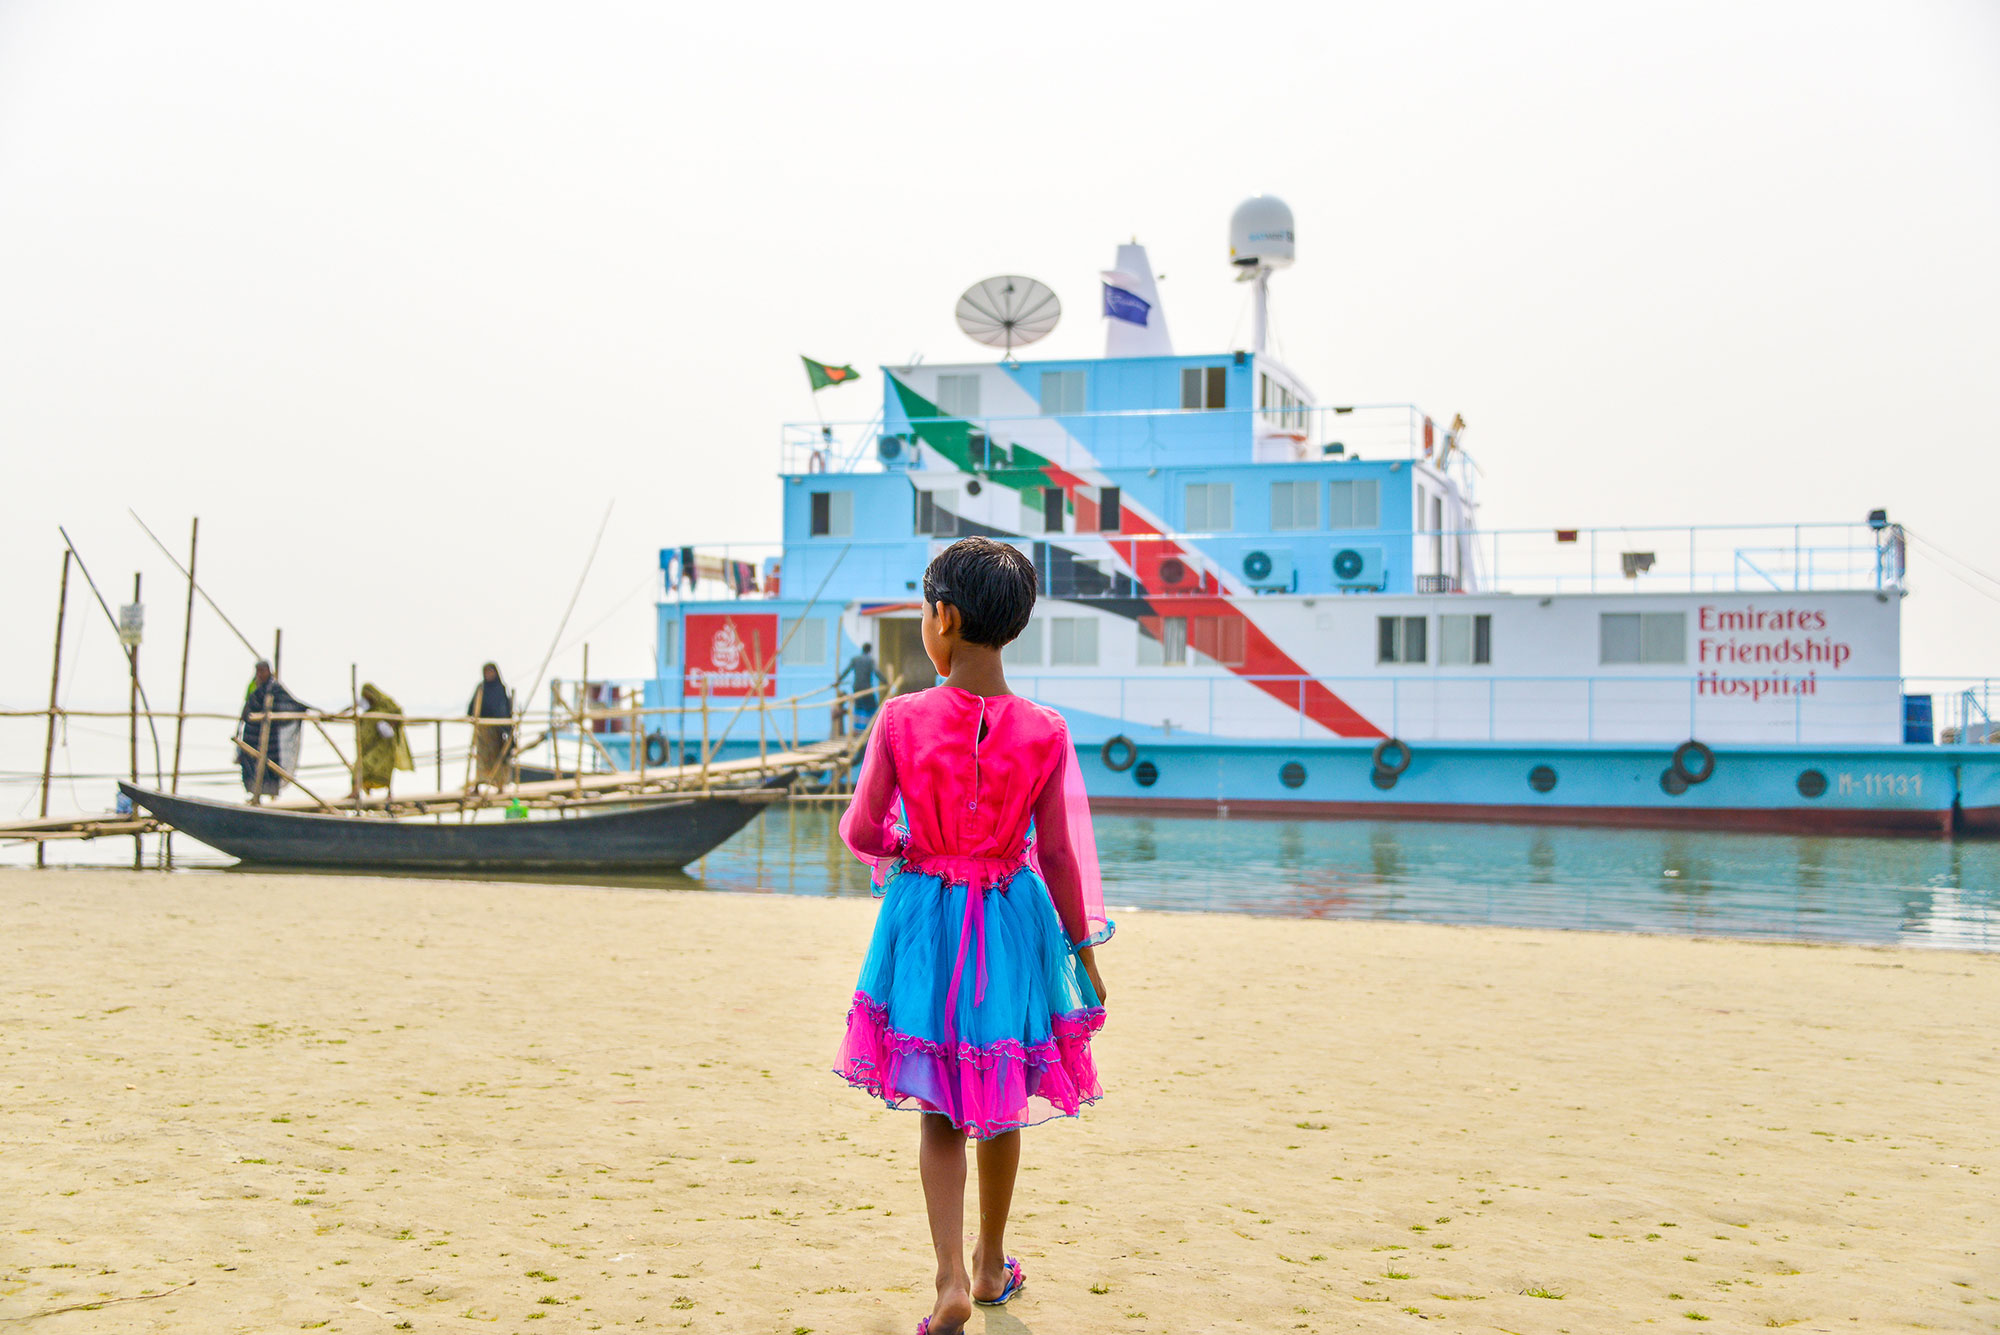 Girl in pink dress standing in front of Emirates Friendship Hospital ship